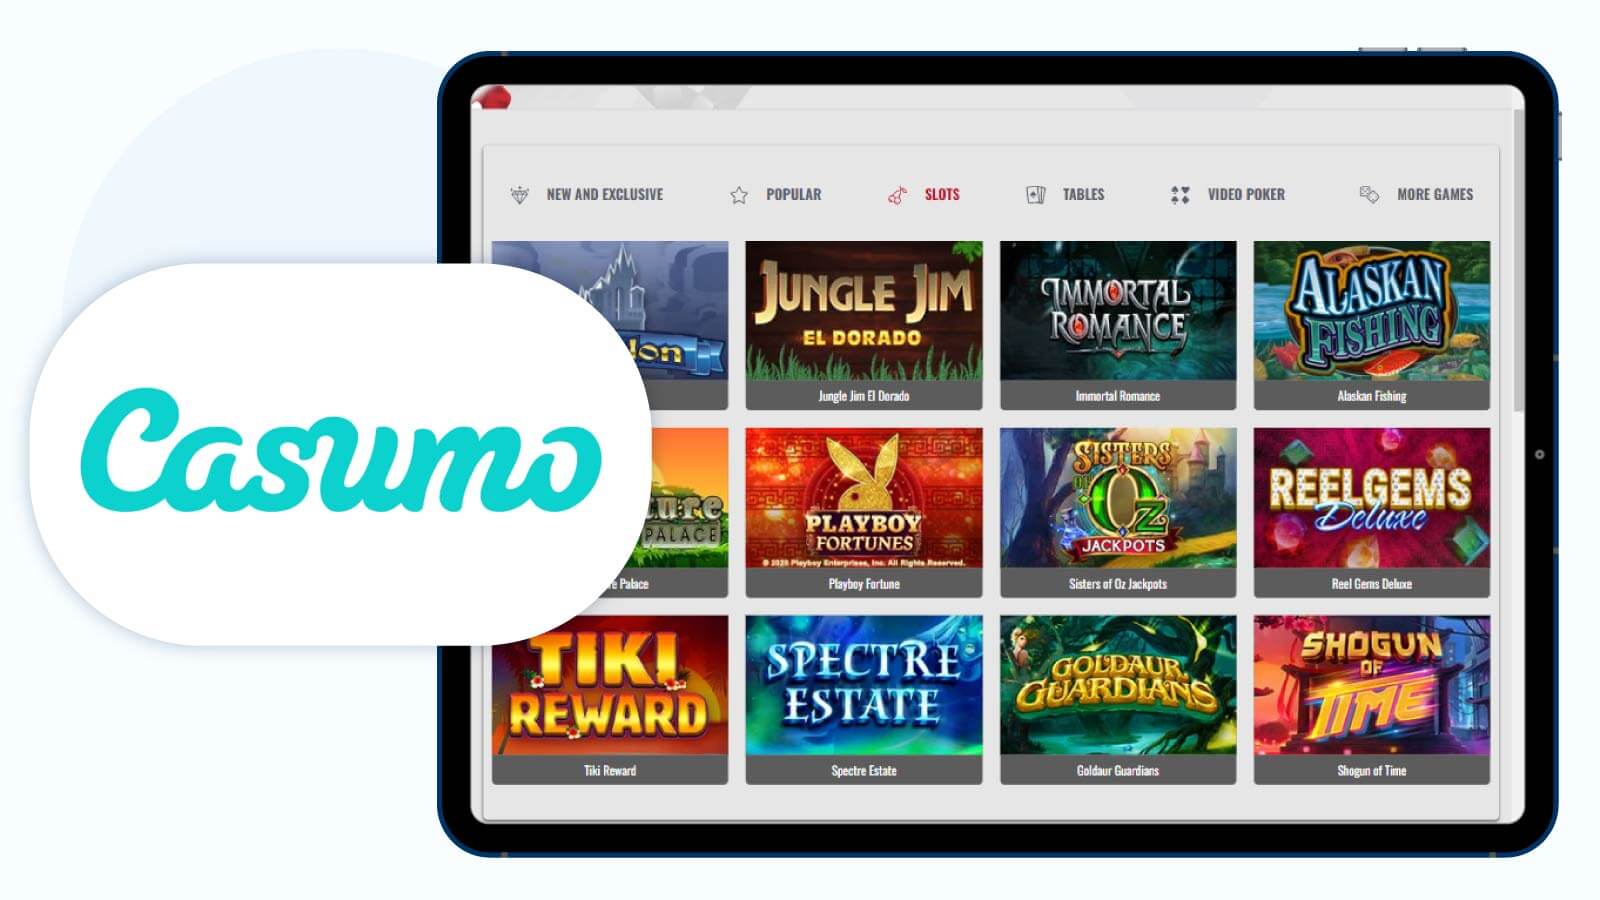 Casumo-Casino-Best-casino-with-free-spins-for-$10